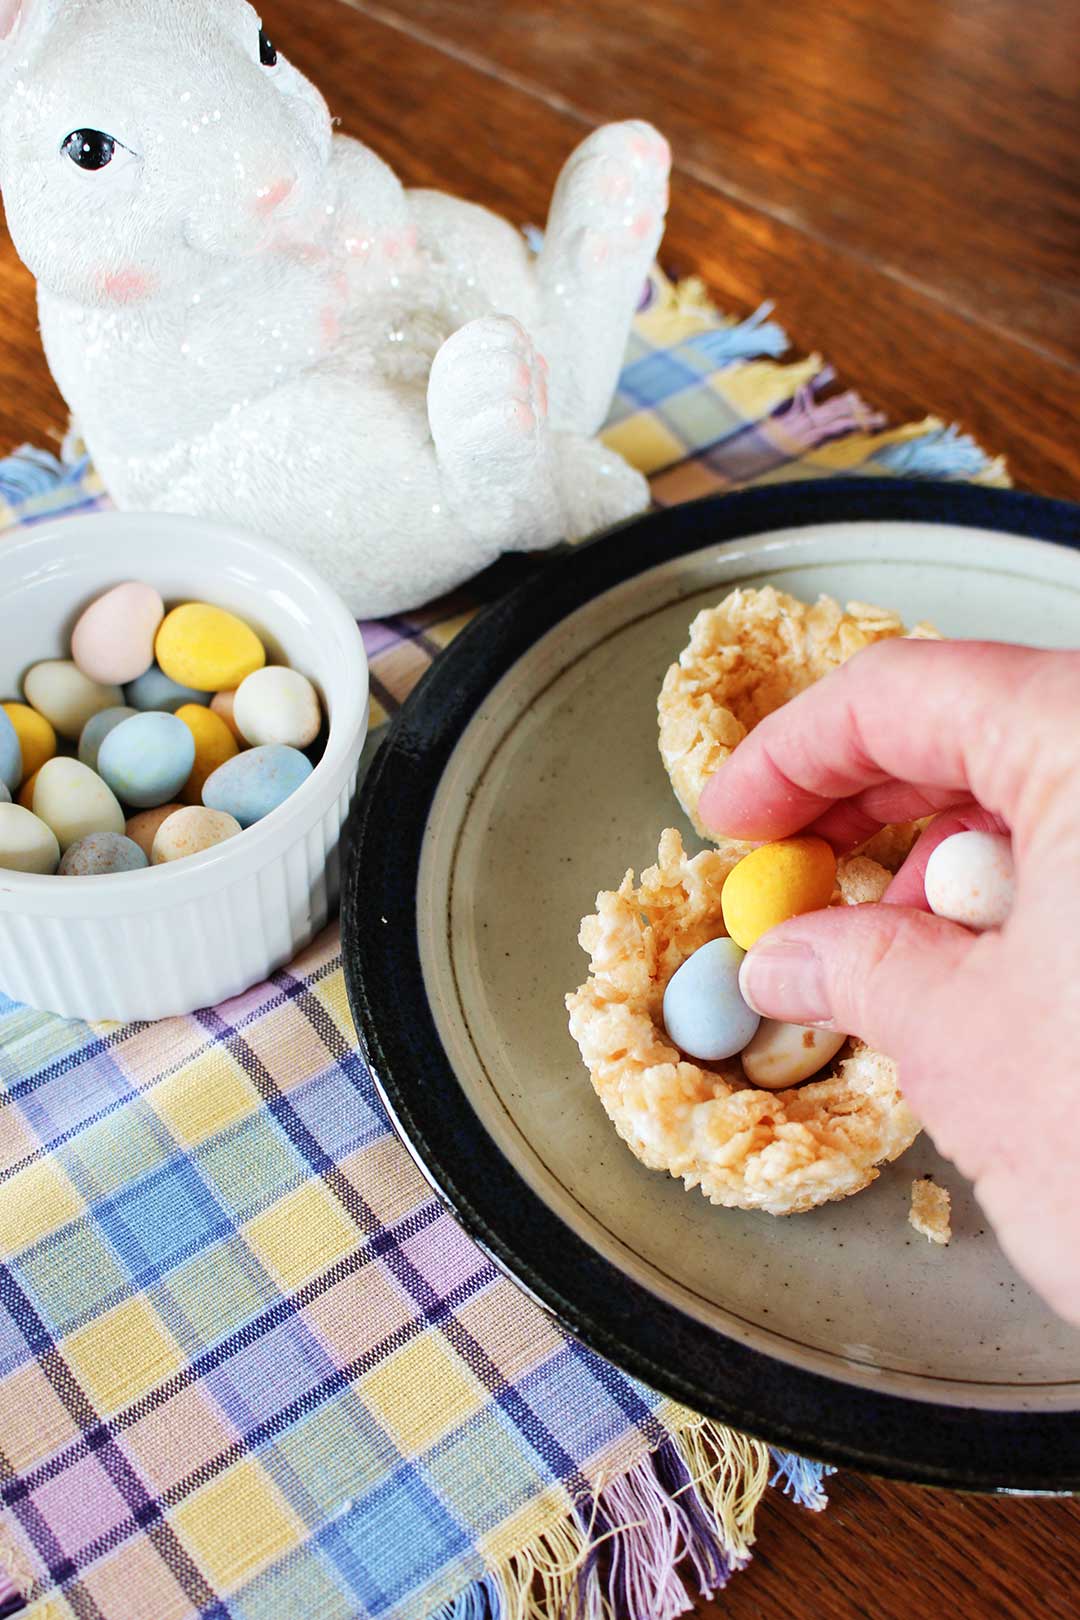 Adding chocolate easter eggs to a rice krispie easter nest, a bunny and bowl of eggs nearby.